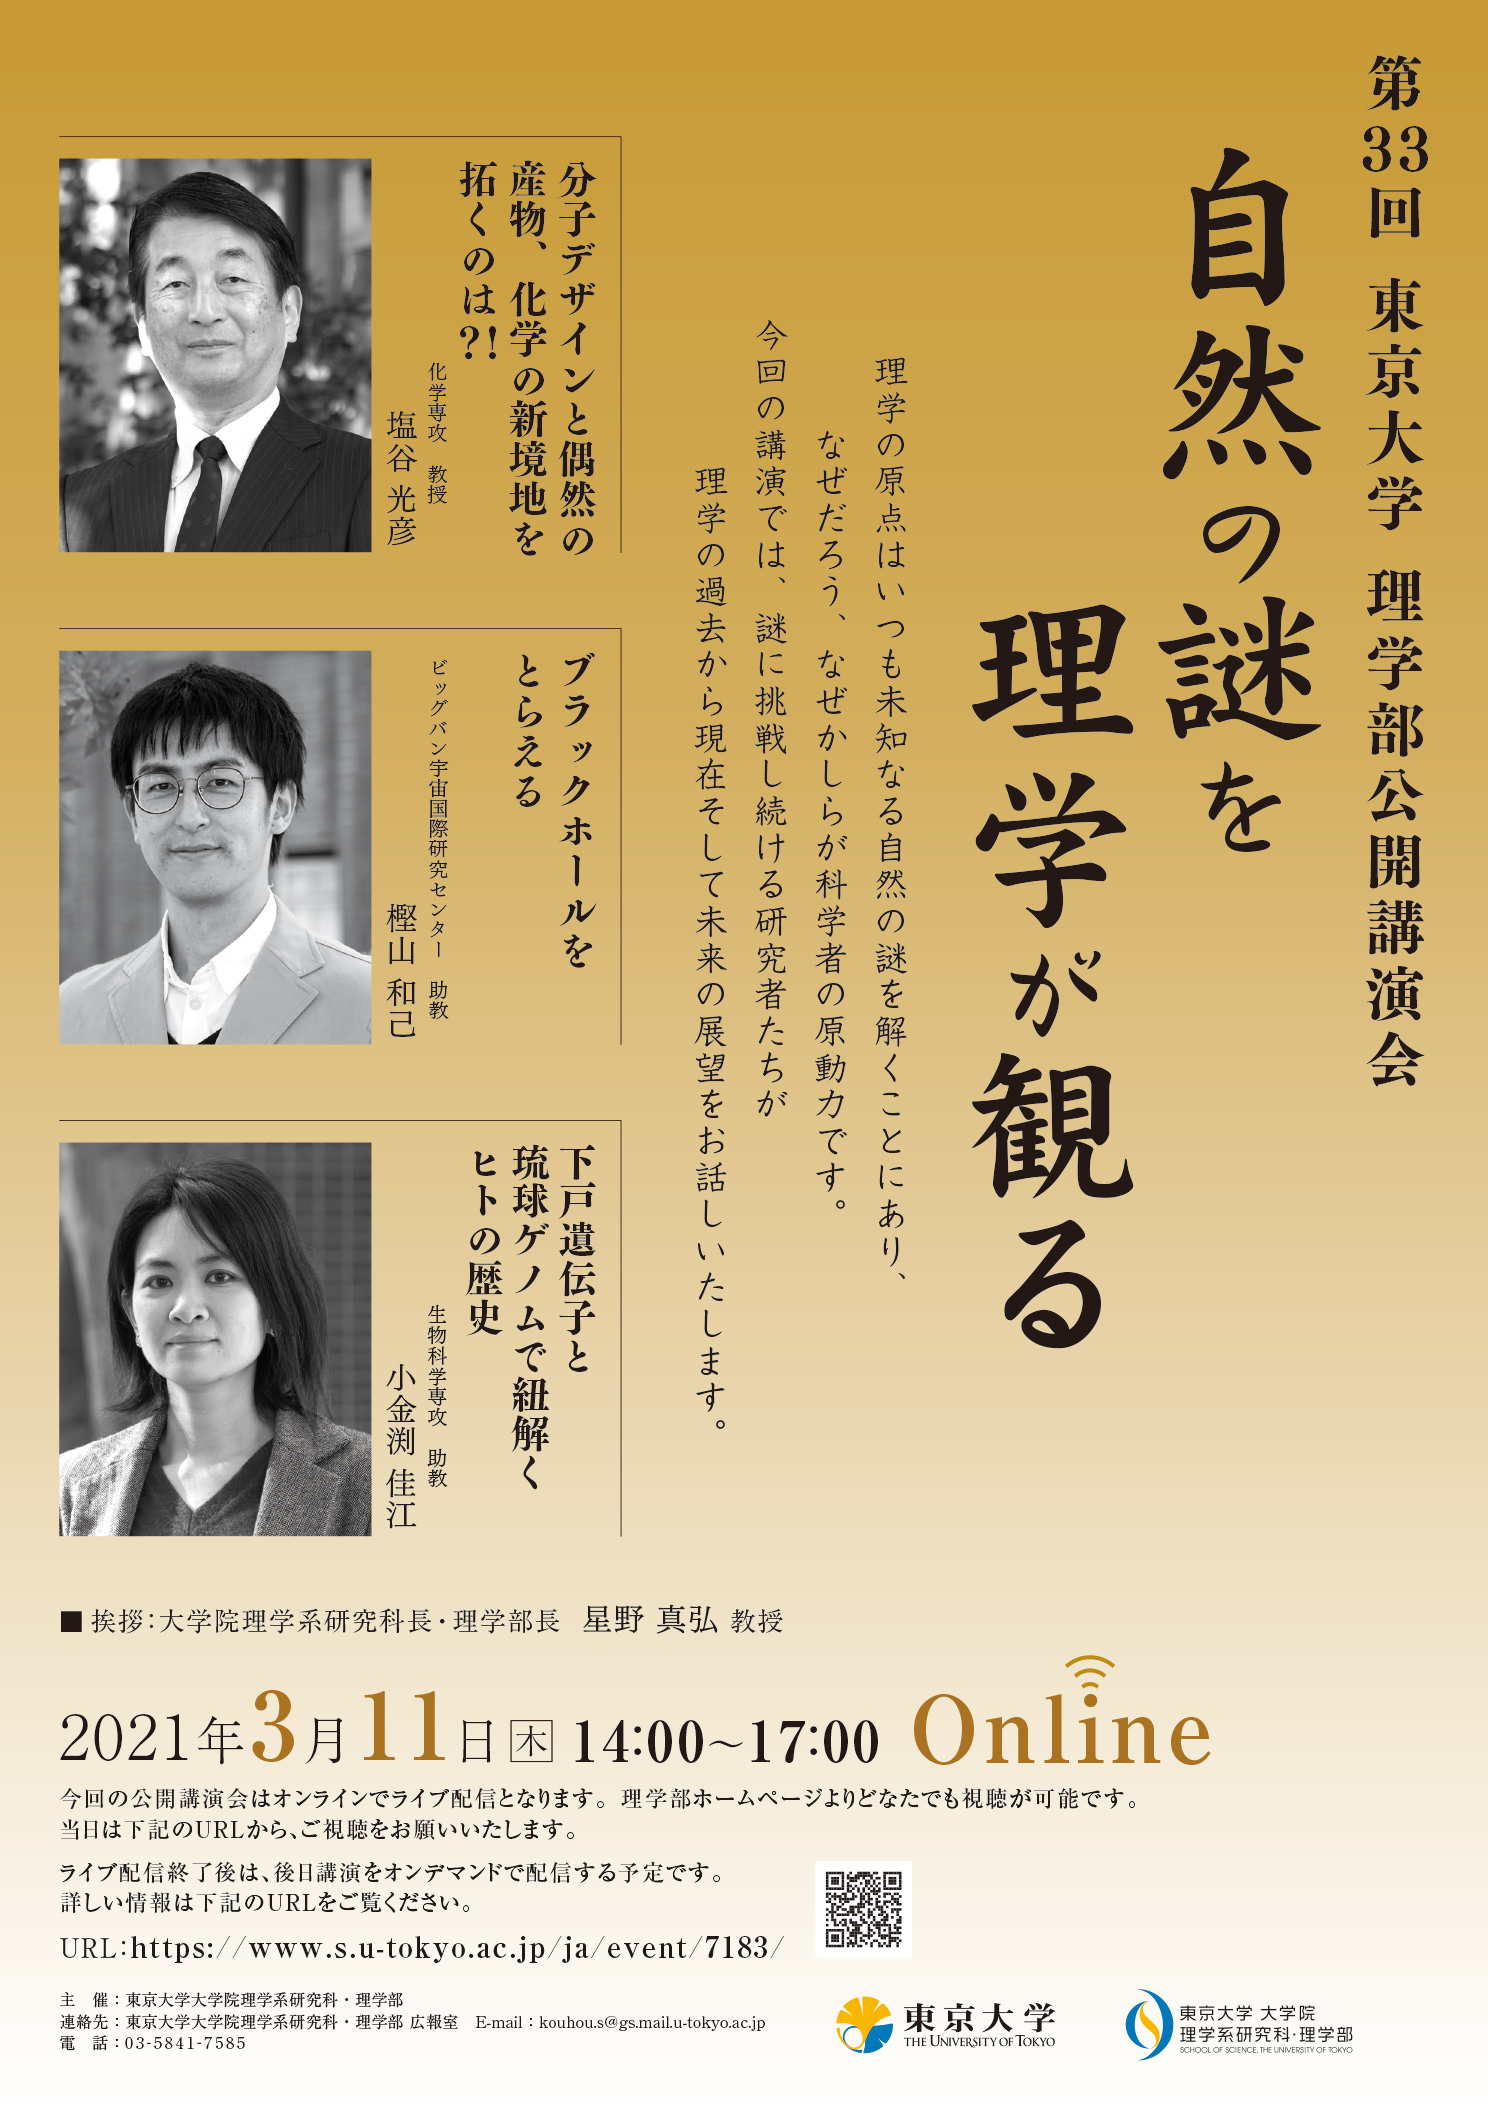 The 33rd Public Lecture of the Faculty of Science, The University of Tokyo Online